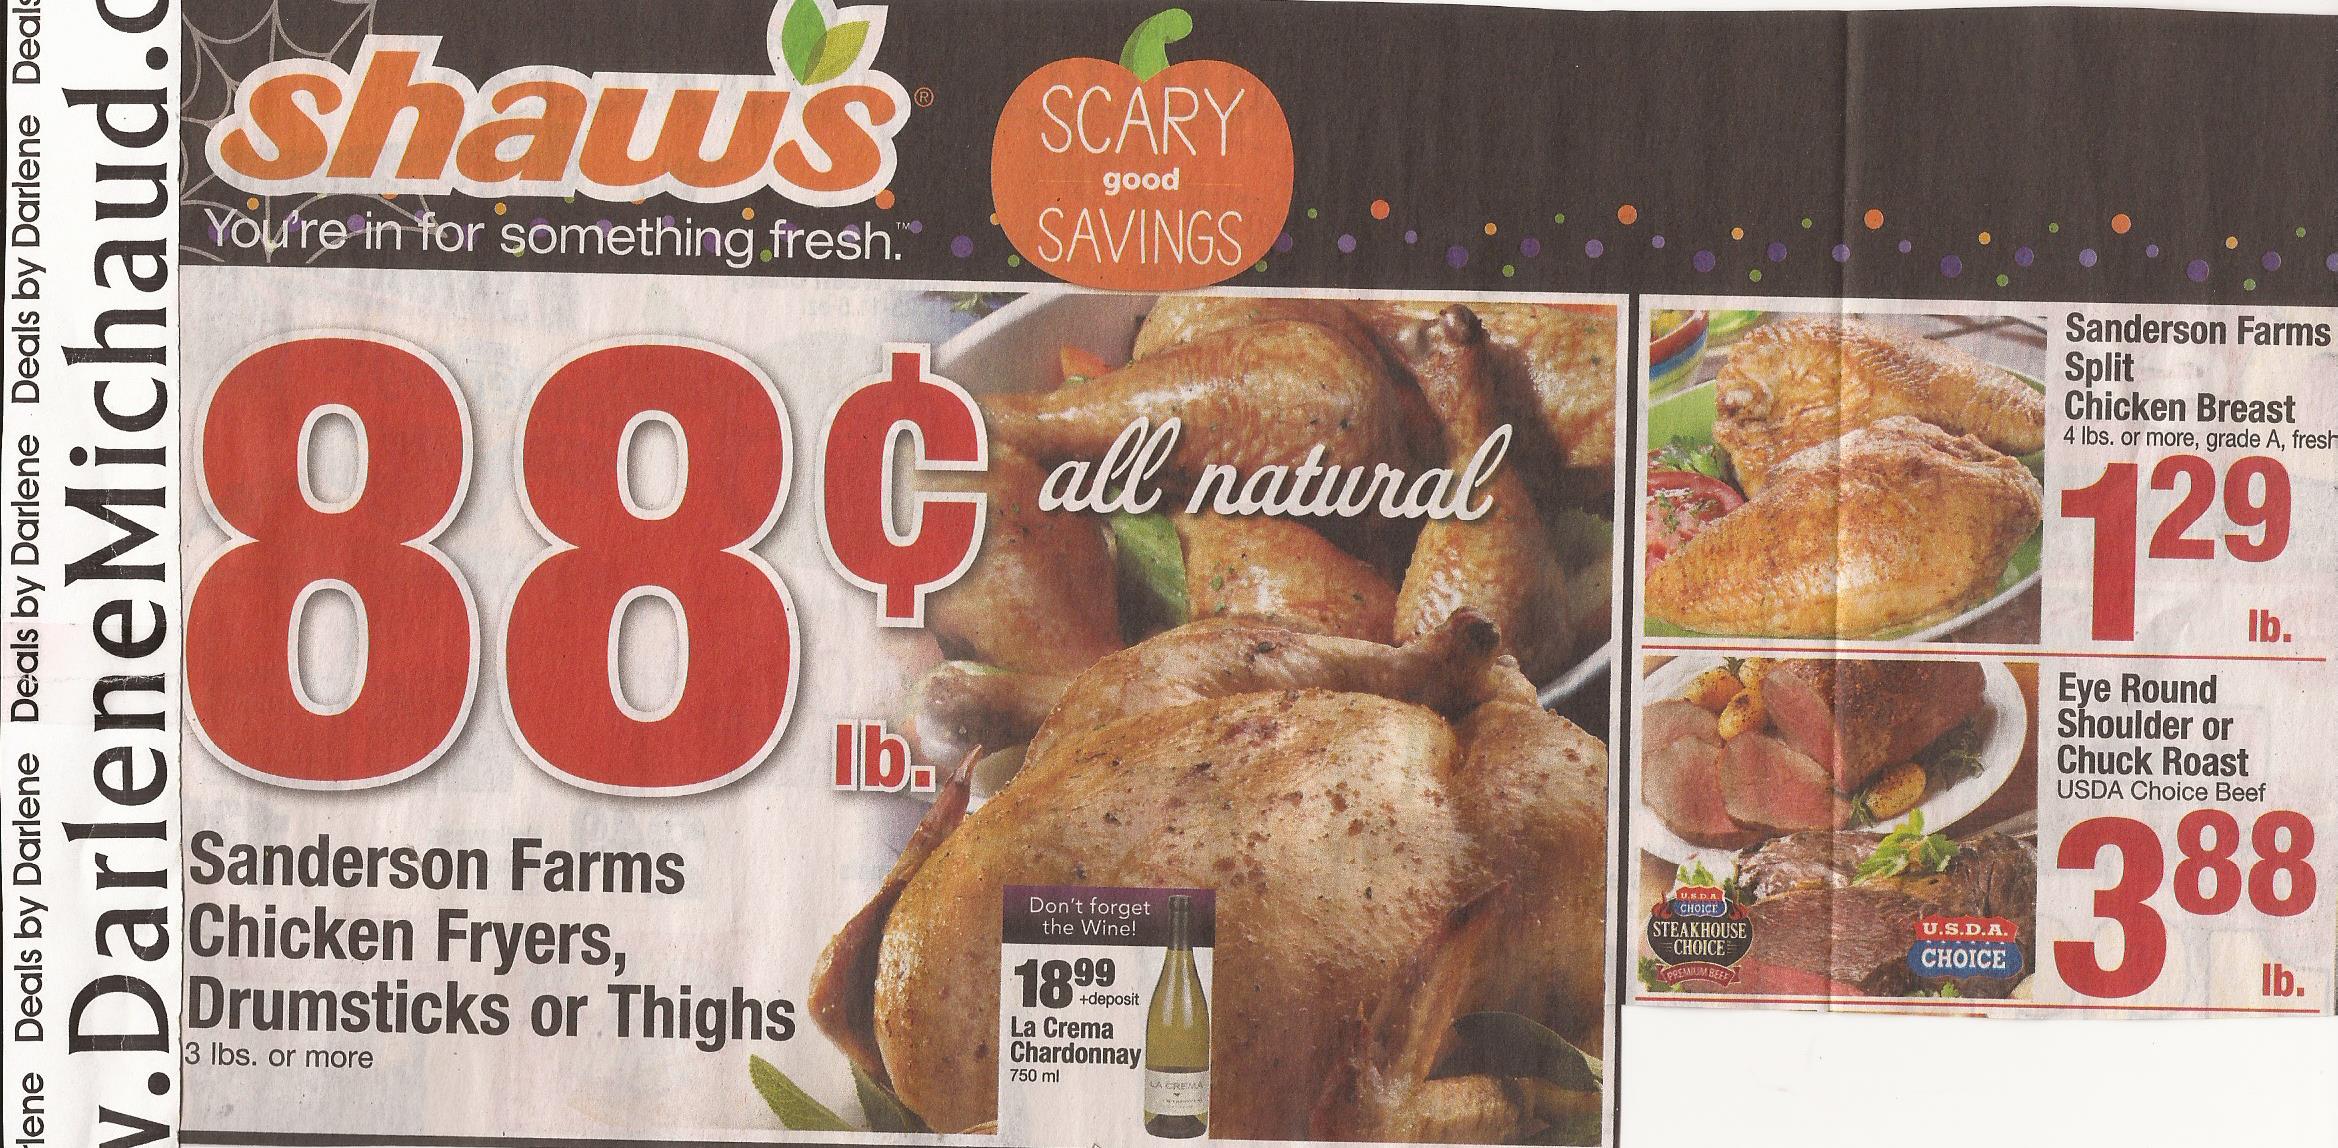 shaws-flyer-oct-23-oct-29-page-1a